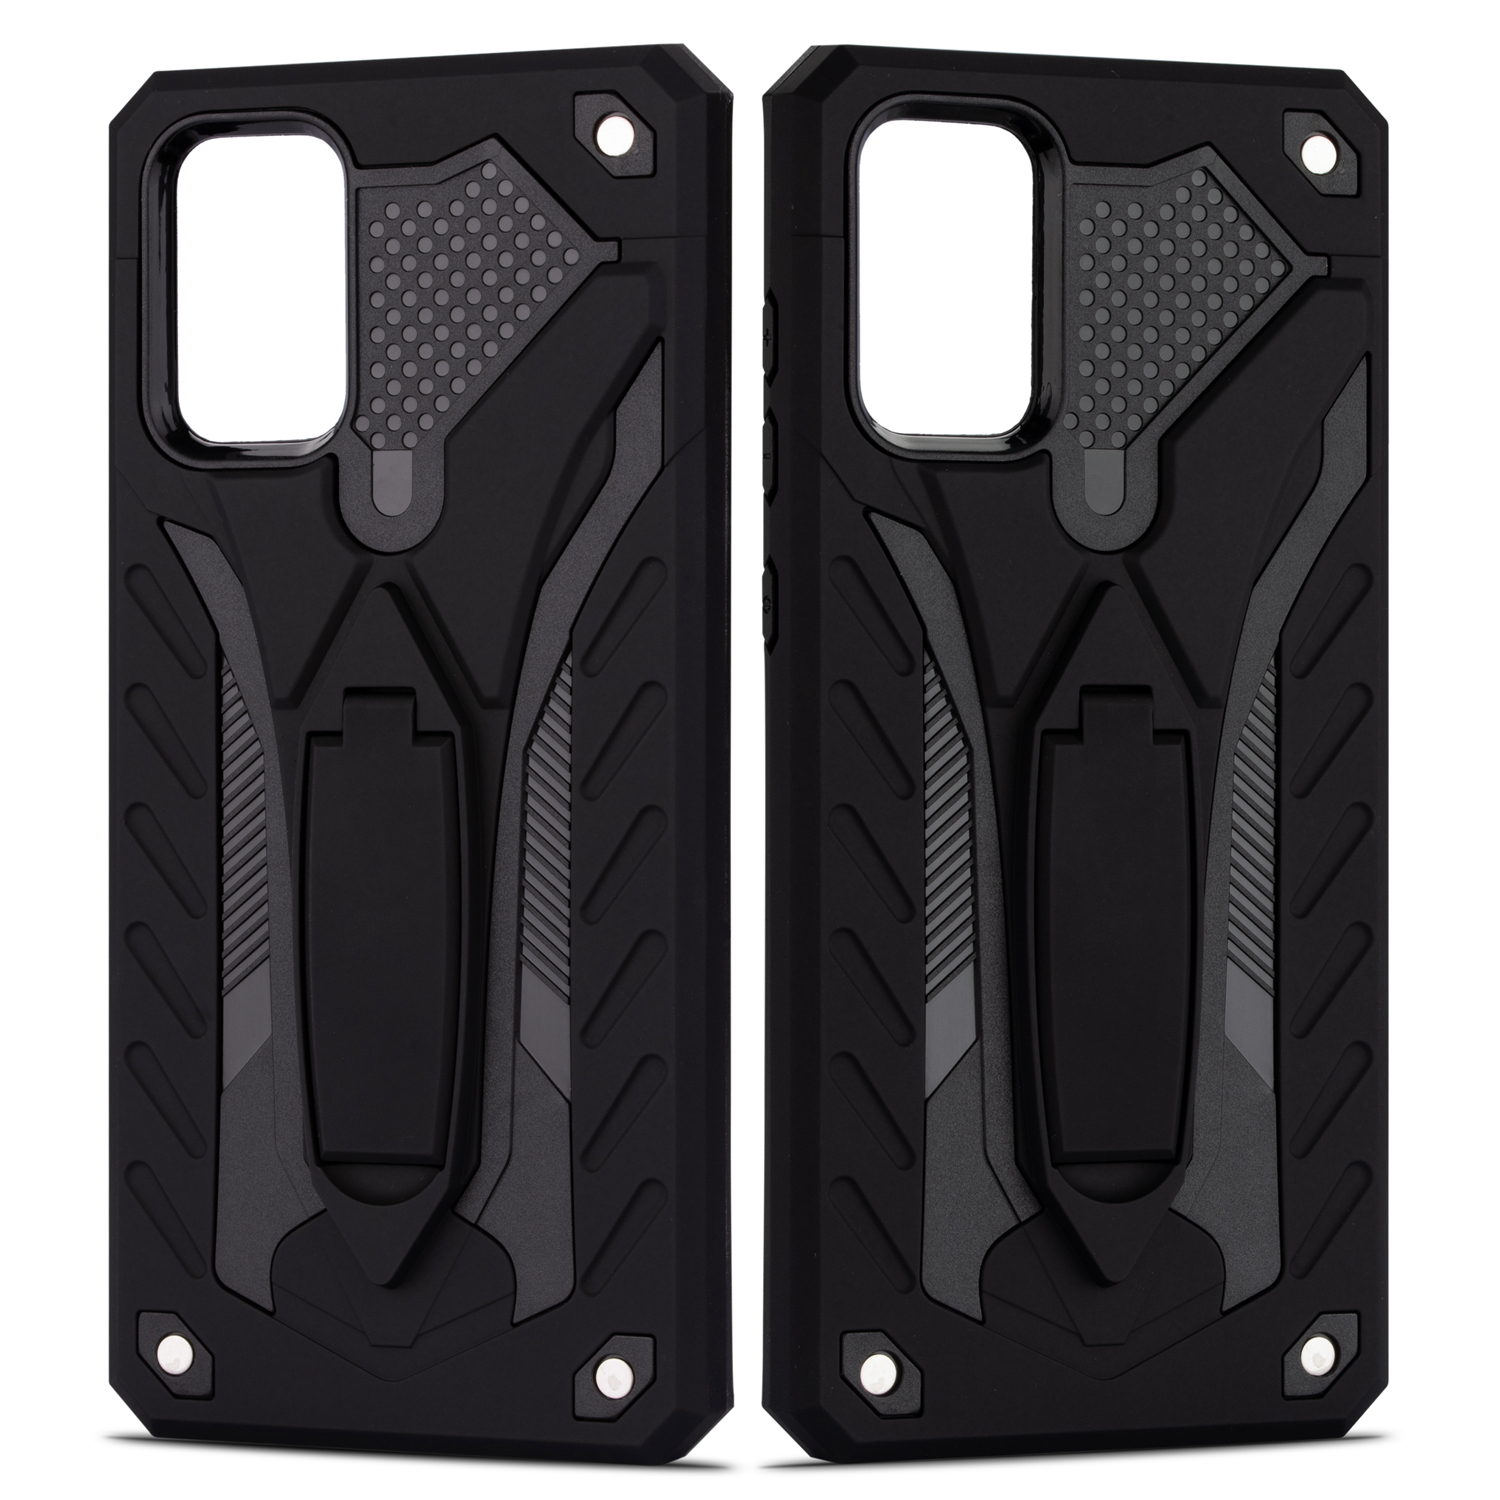 Bakeey-for-Xiaomi-Redmi-9A-Case-Armor-Shockproof-Anti-Fingerprint-with-Ring-Bracket-Stand-PC--TPU-Pr-1726498-2